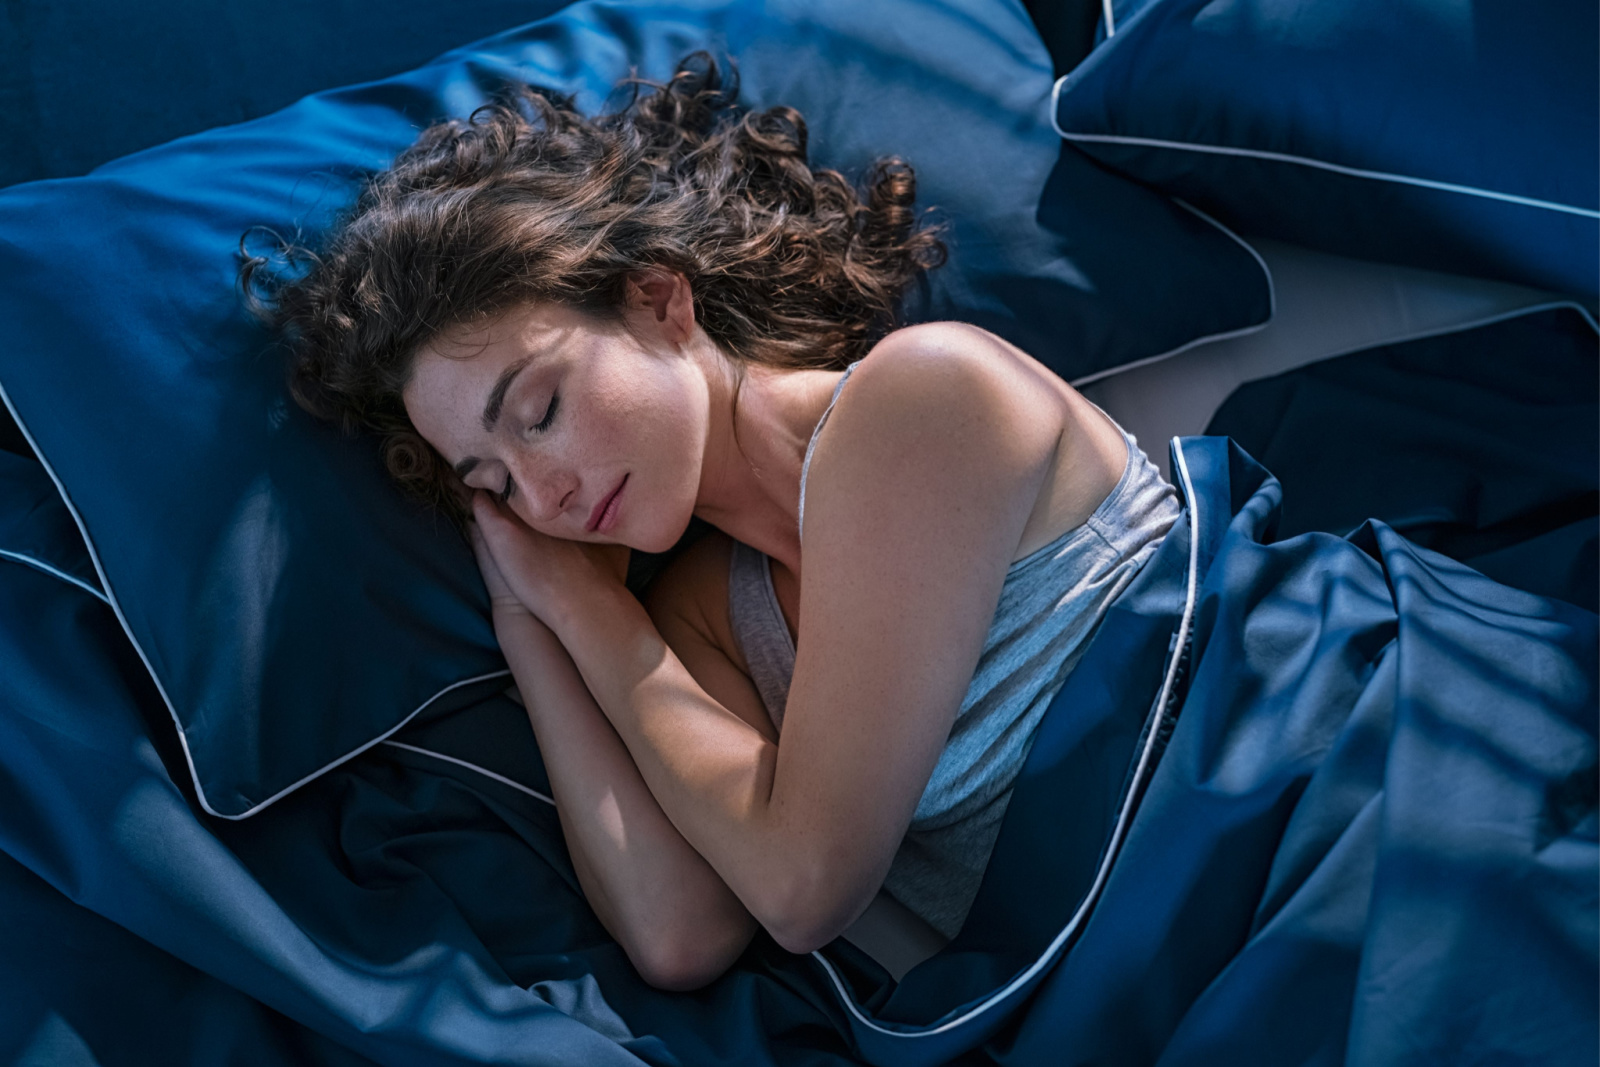 How To Get Better Sleep At Night In Addition To Navy SEAL Sleep Technique: Woman With Long Hair Sleeps Soundly In Bed